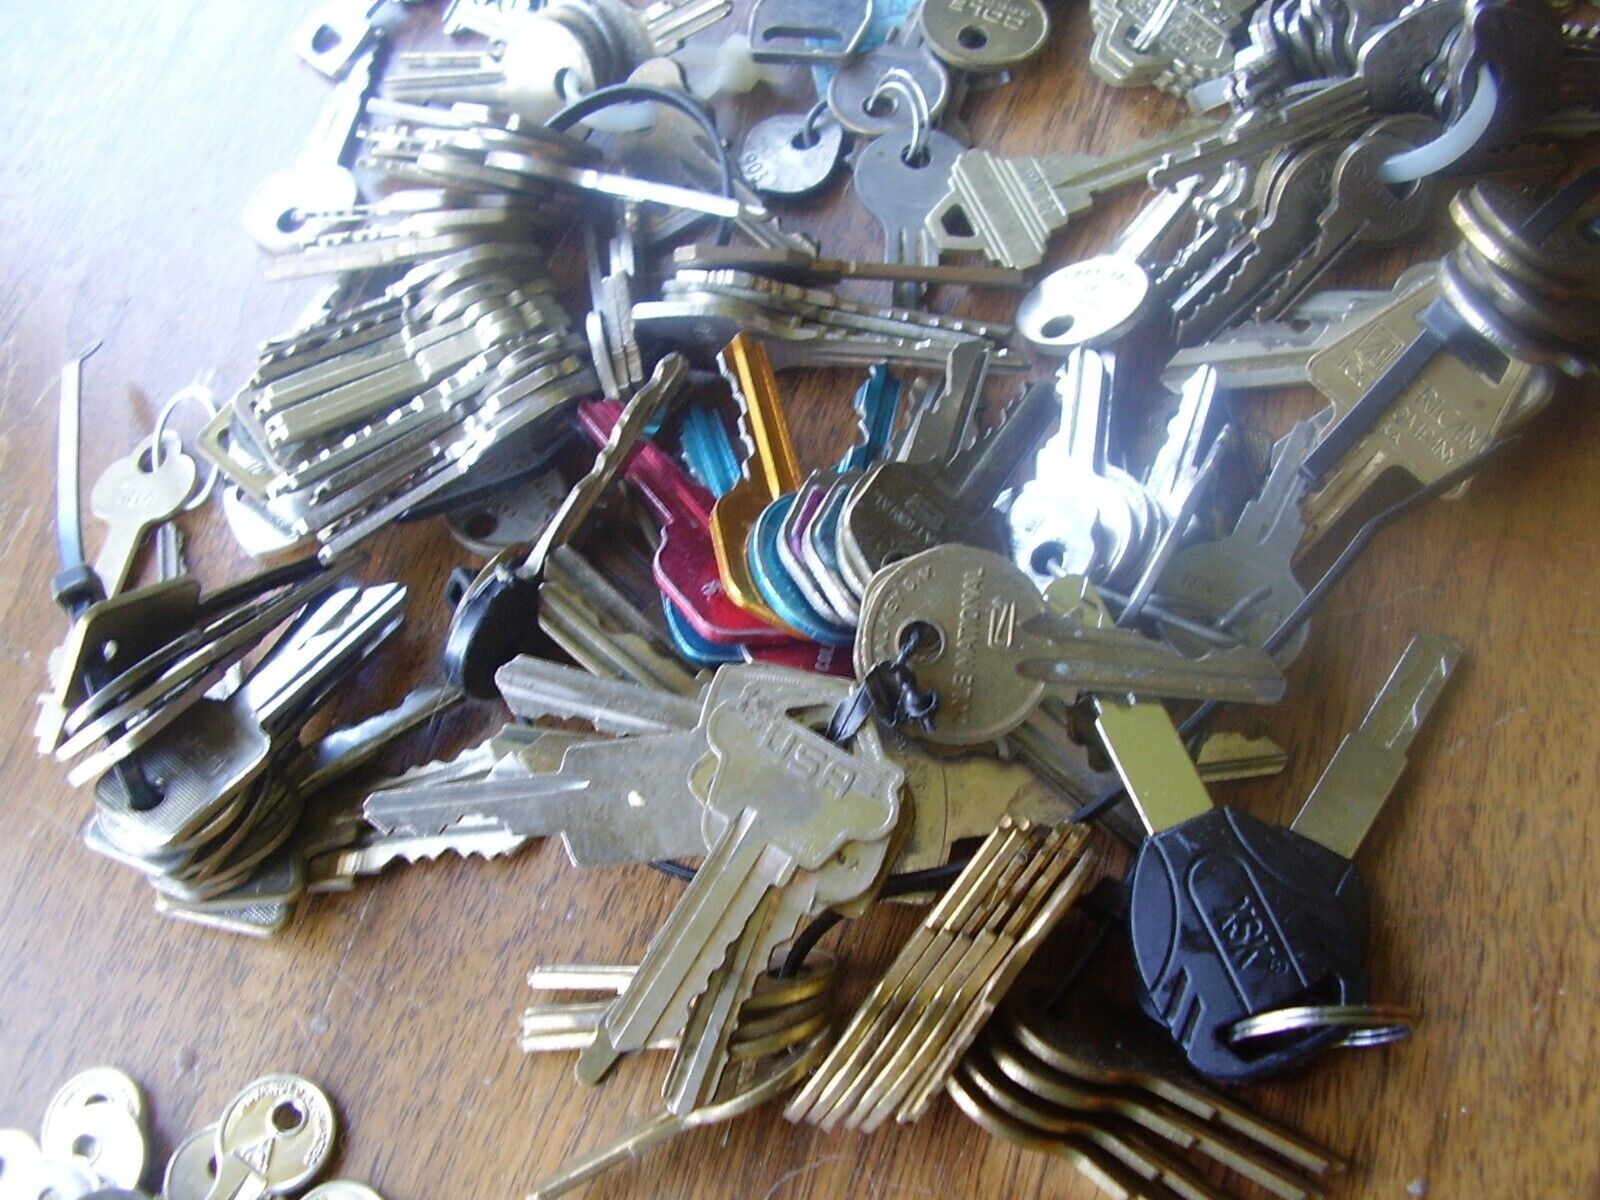 Lot of Misc. Cut Keys 5 Pounds (LBS) HOUSE, CARS. and others